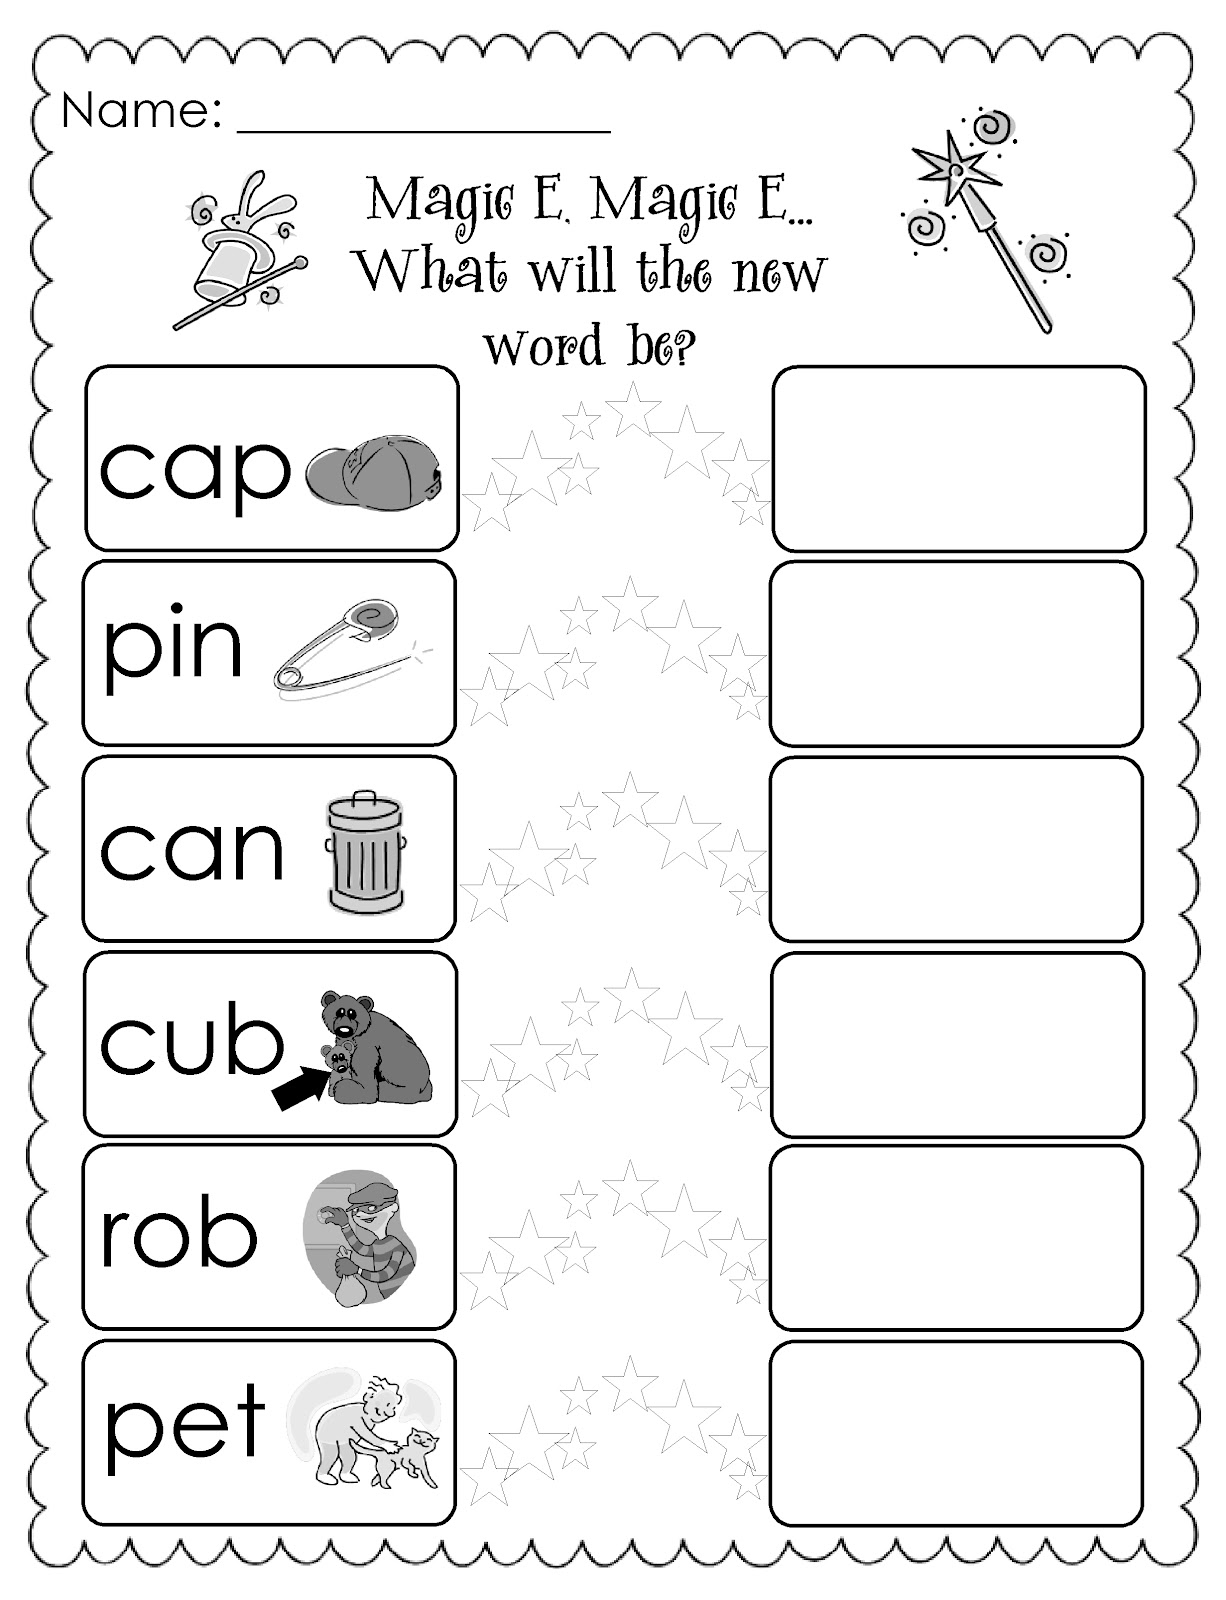 16-best-images-of-cvce-worksheets-for-first-grade-magic-e-words-worksheets-the-word